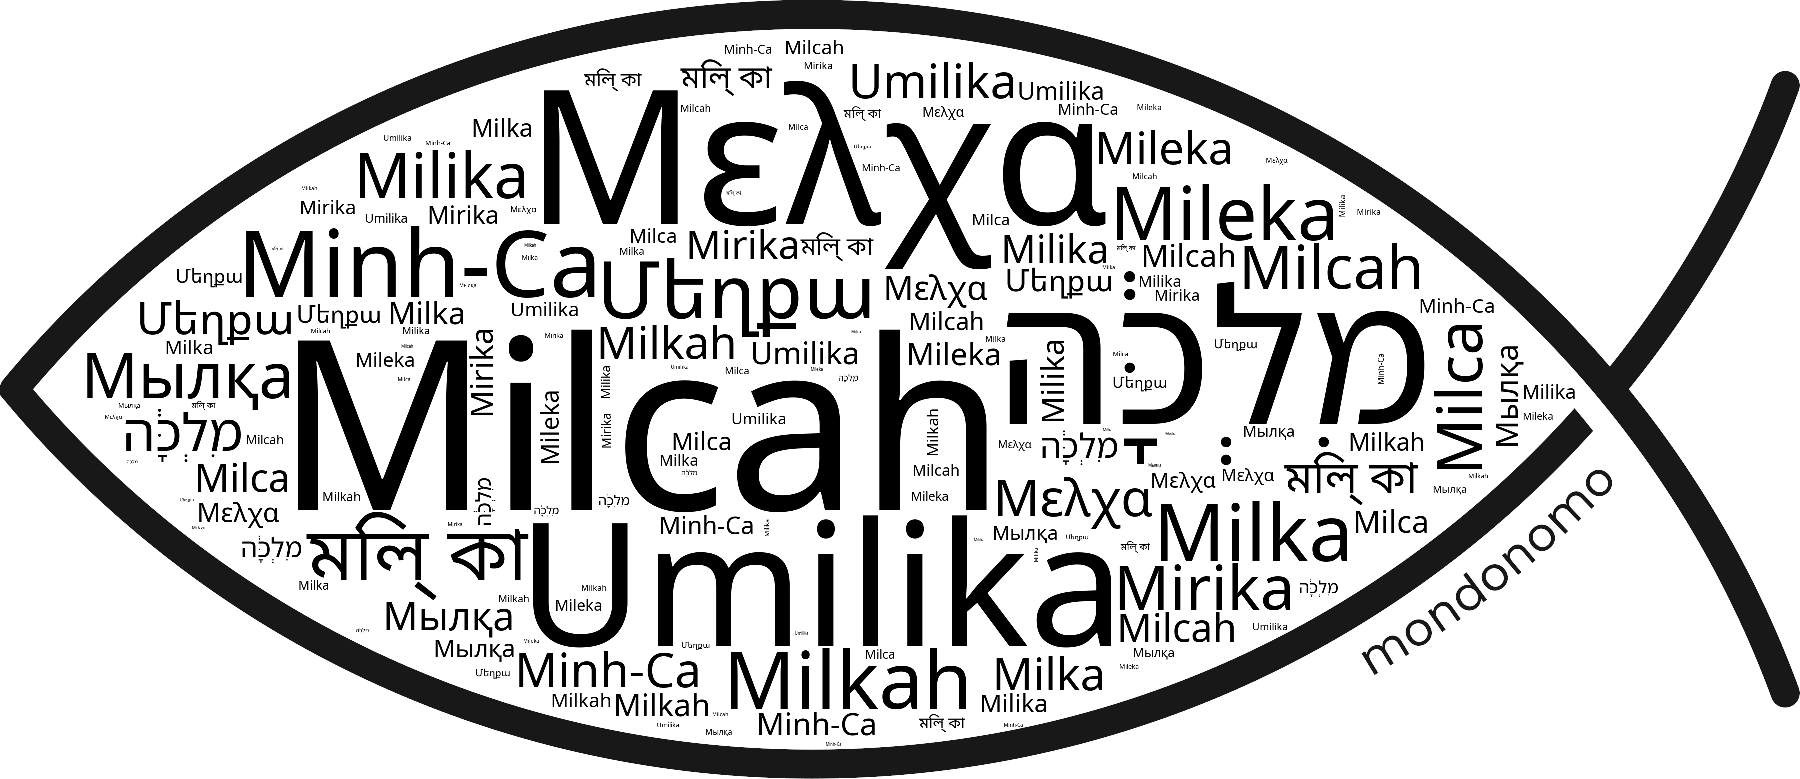 Name Milcah in the world's Bibles